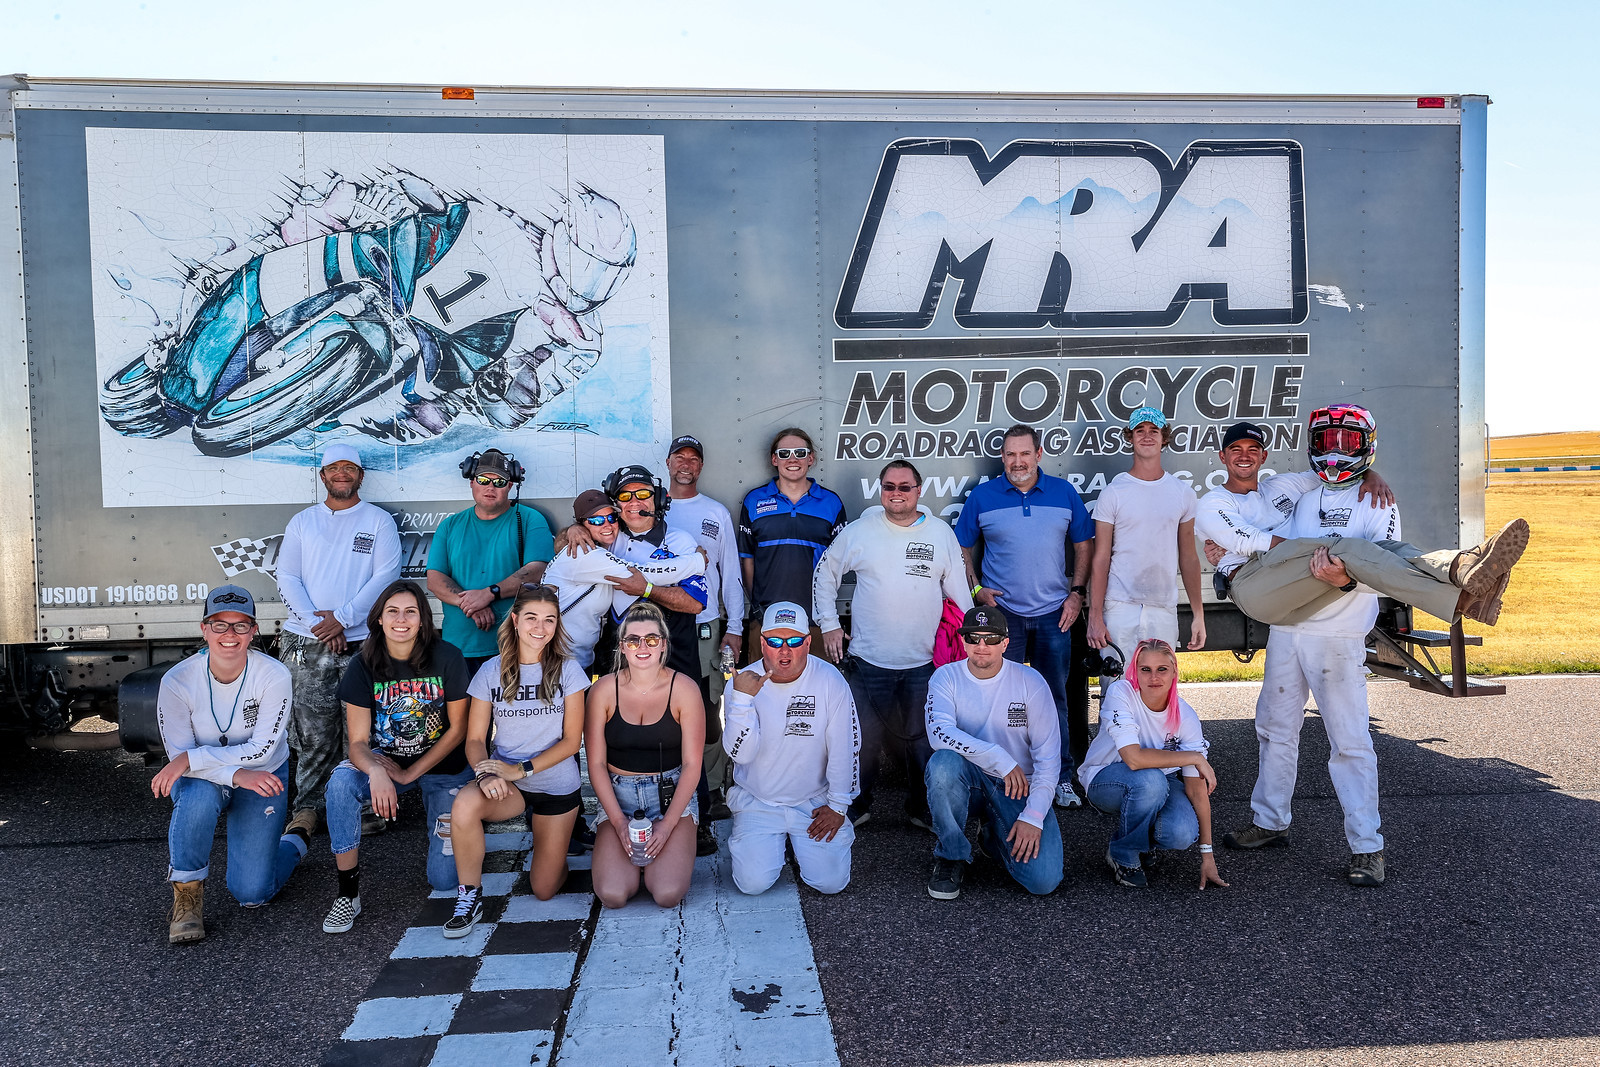 The 2021 MRA Corner Marshal and trackside support crew. Photo courtesy MRA.